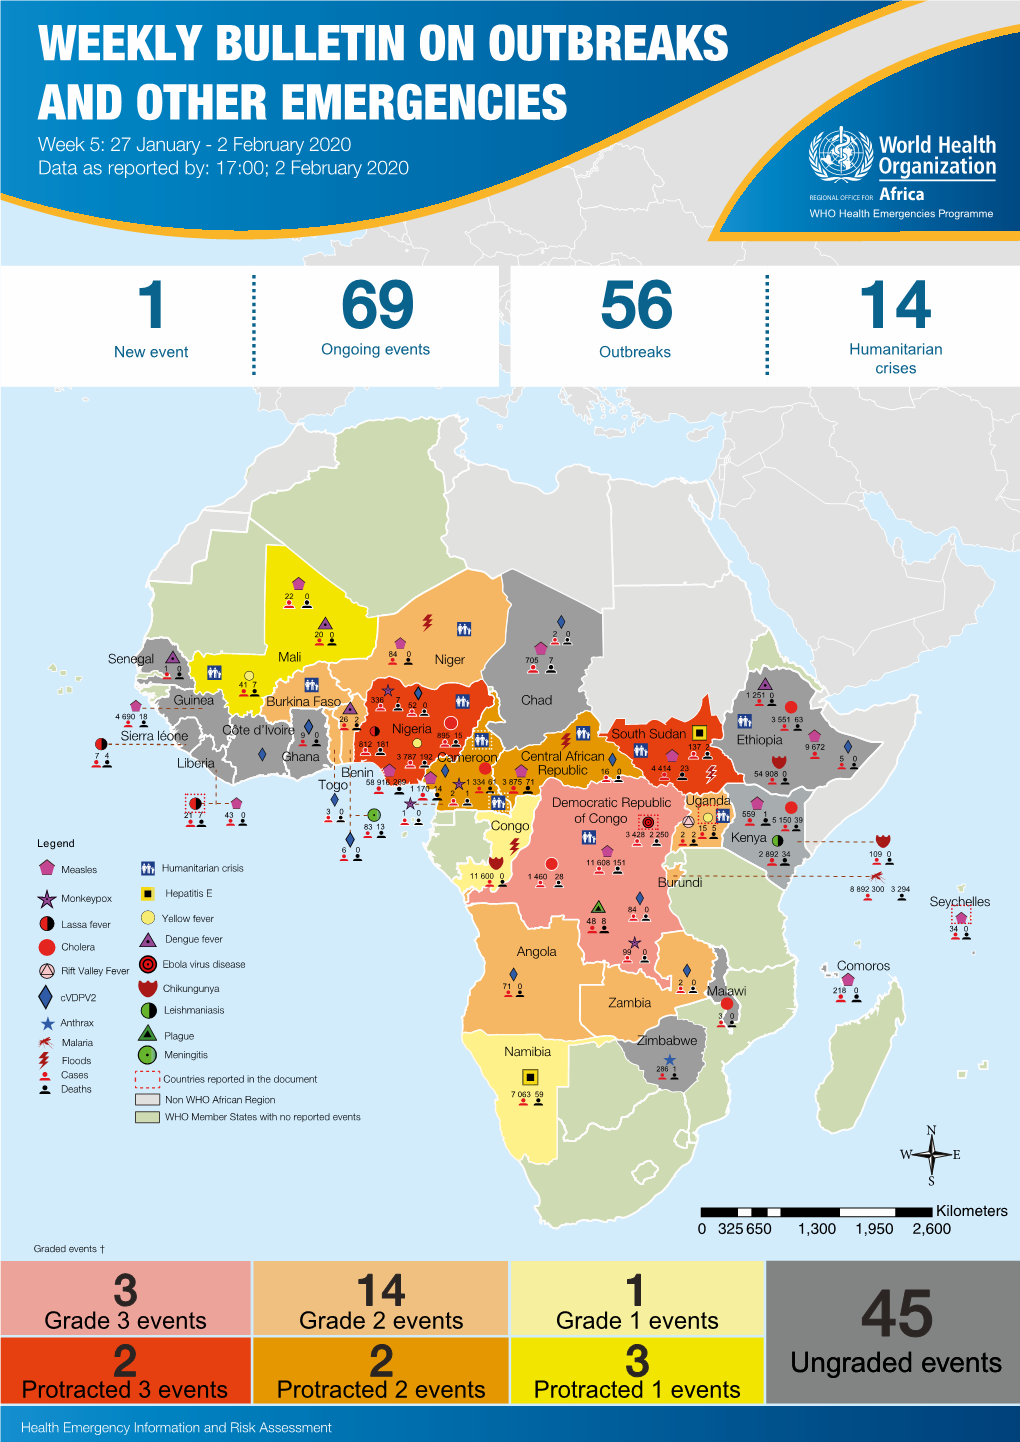 WEEKLY BULLETIN on OUTBREAKS and OTHER EMERGENCIES Week 5: 27 January - 2 February 2020 Data As Reported By: 17:00; 2 February 2020